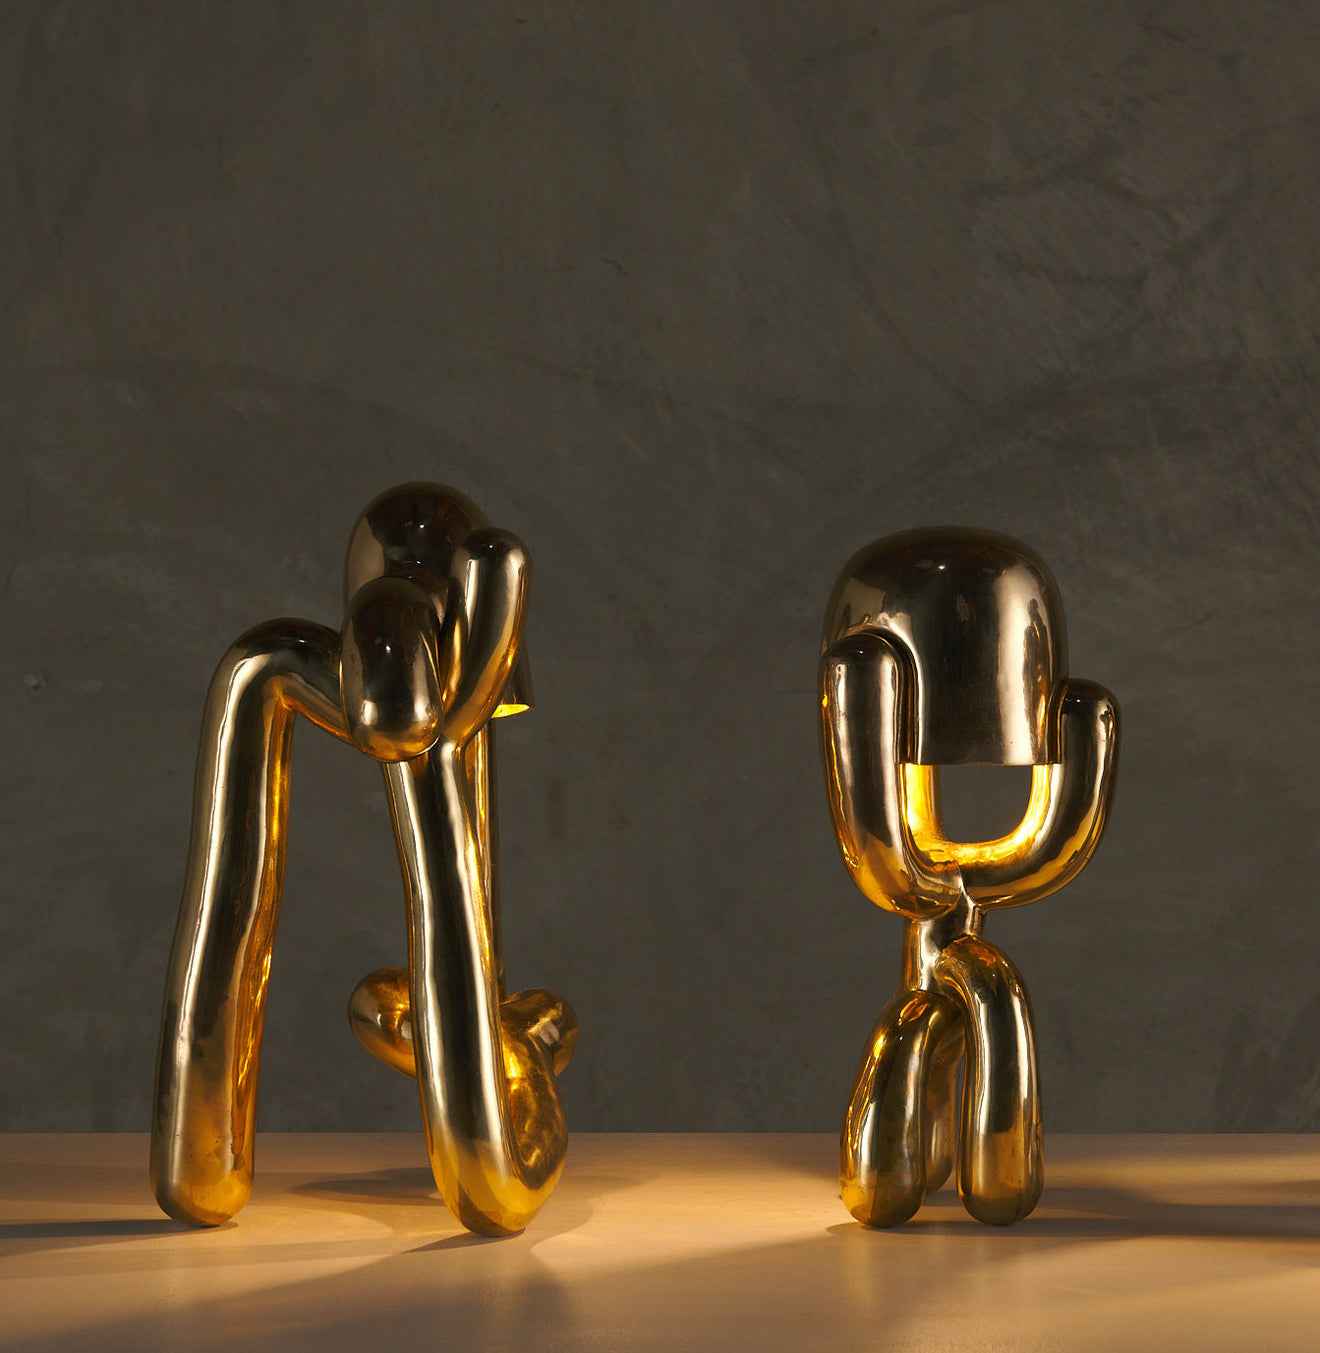 FOOLS GOLD LAMP(S) BY MARCELO SURO